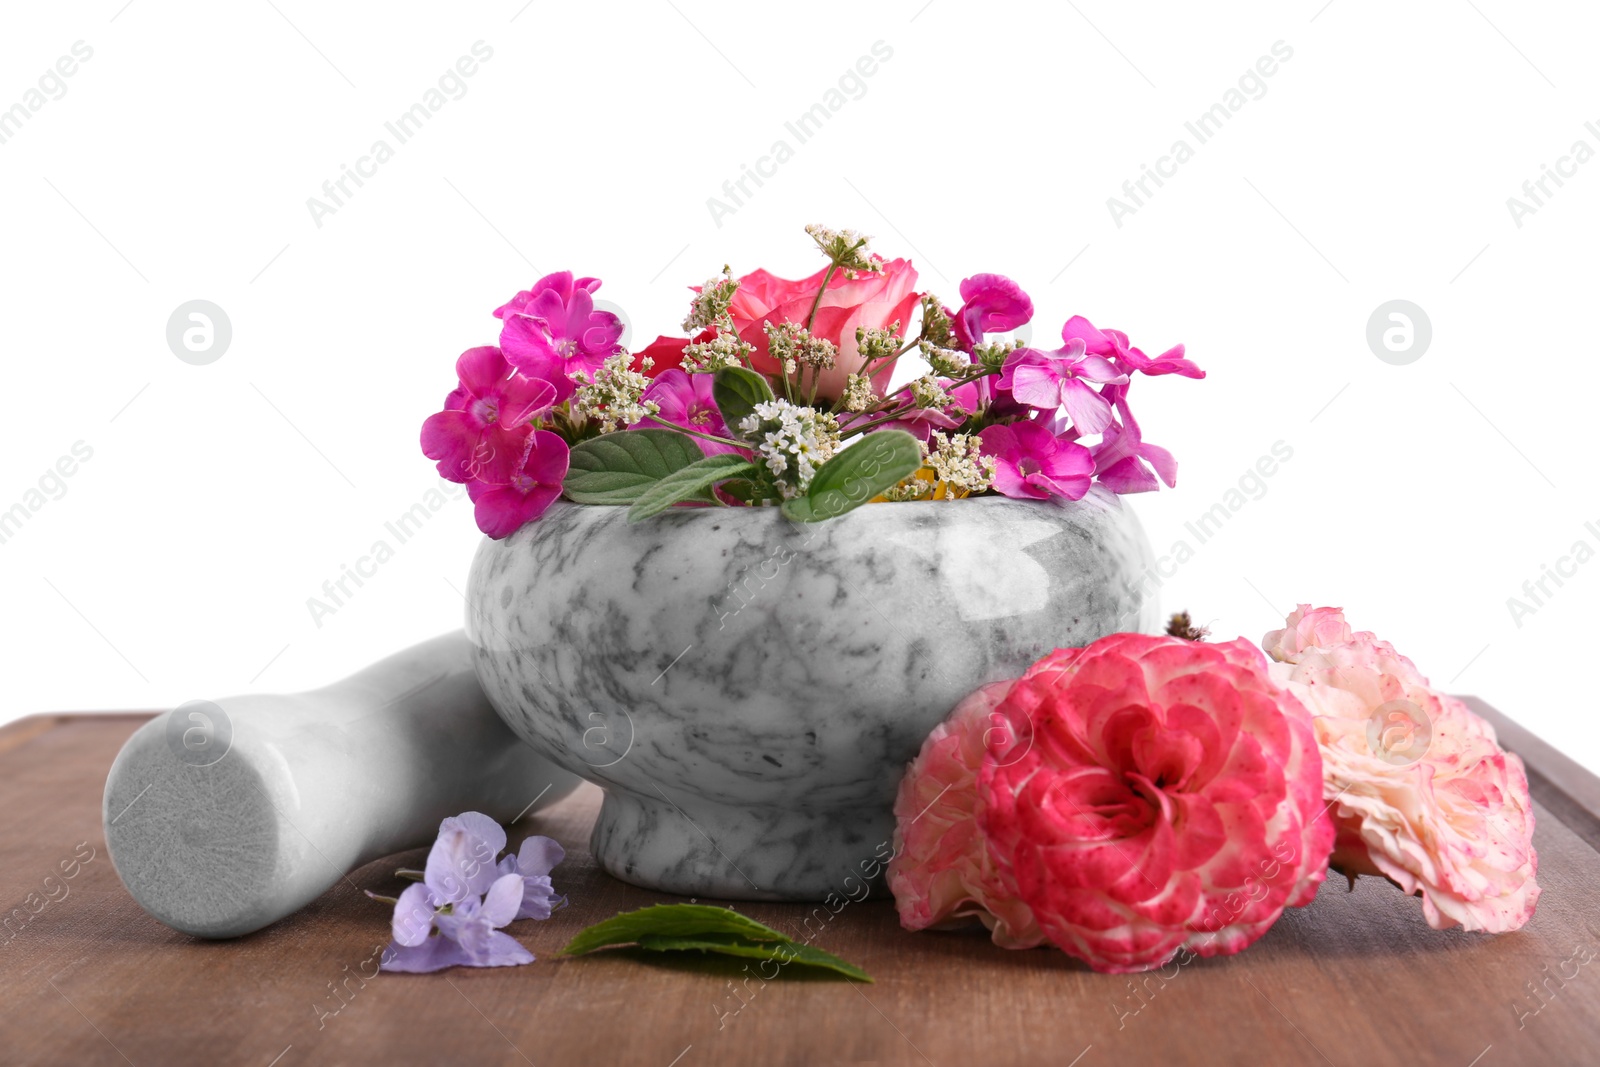 Photo of Marble mortar, pestle and different flowers on wooden board against white background